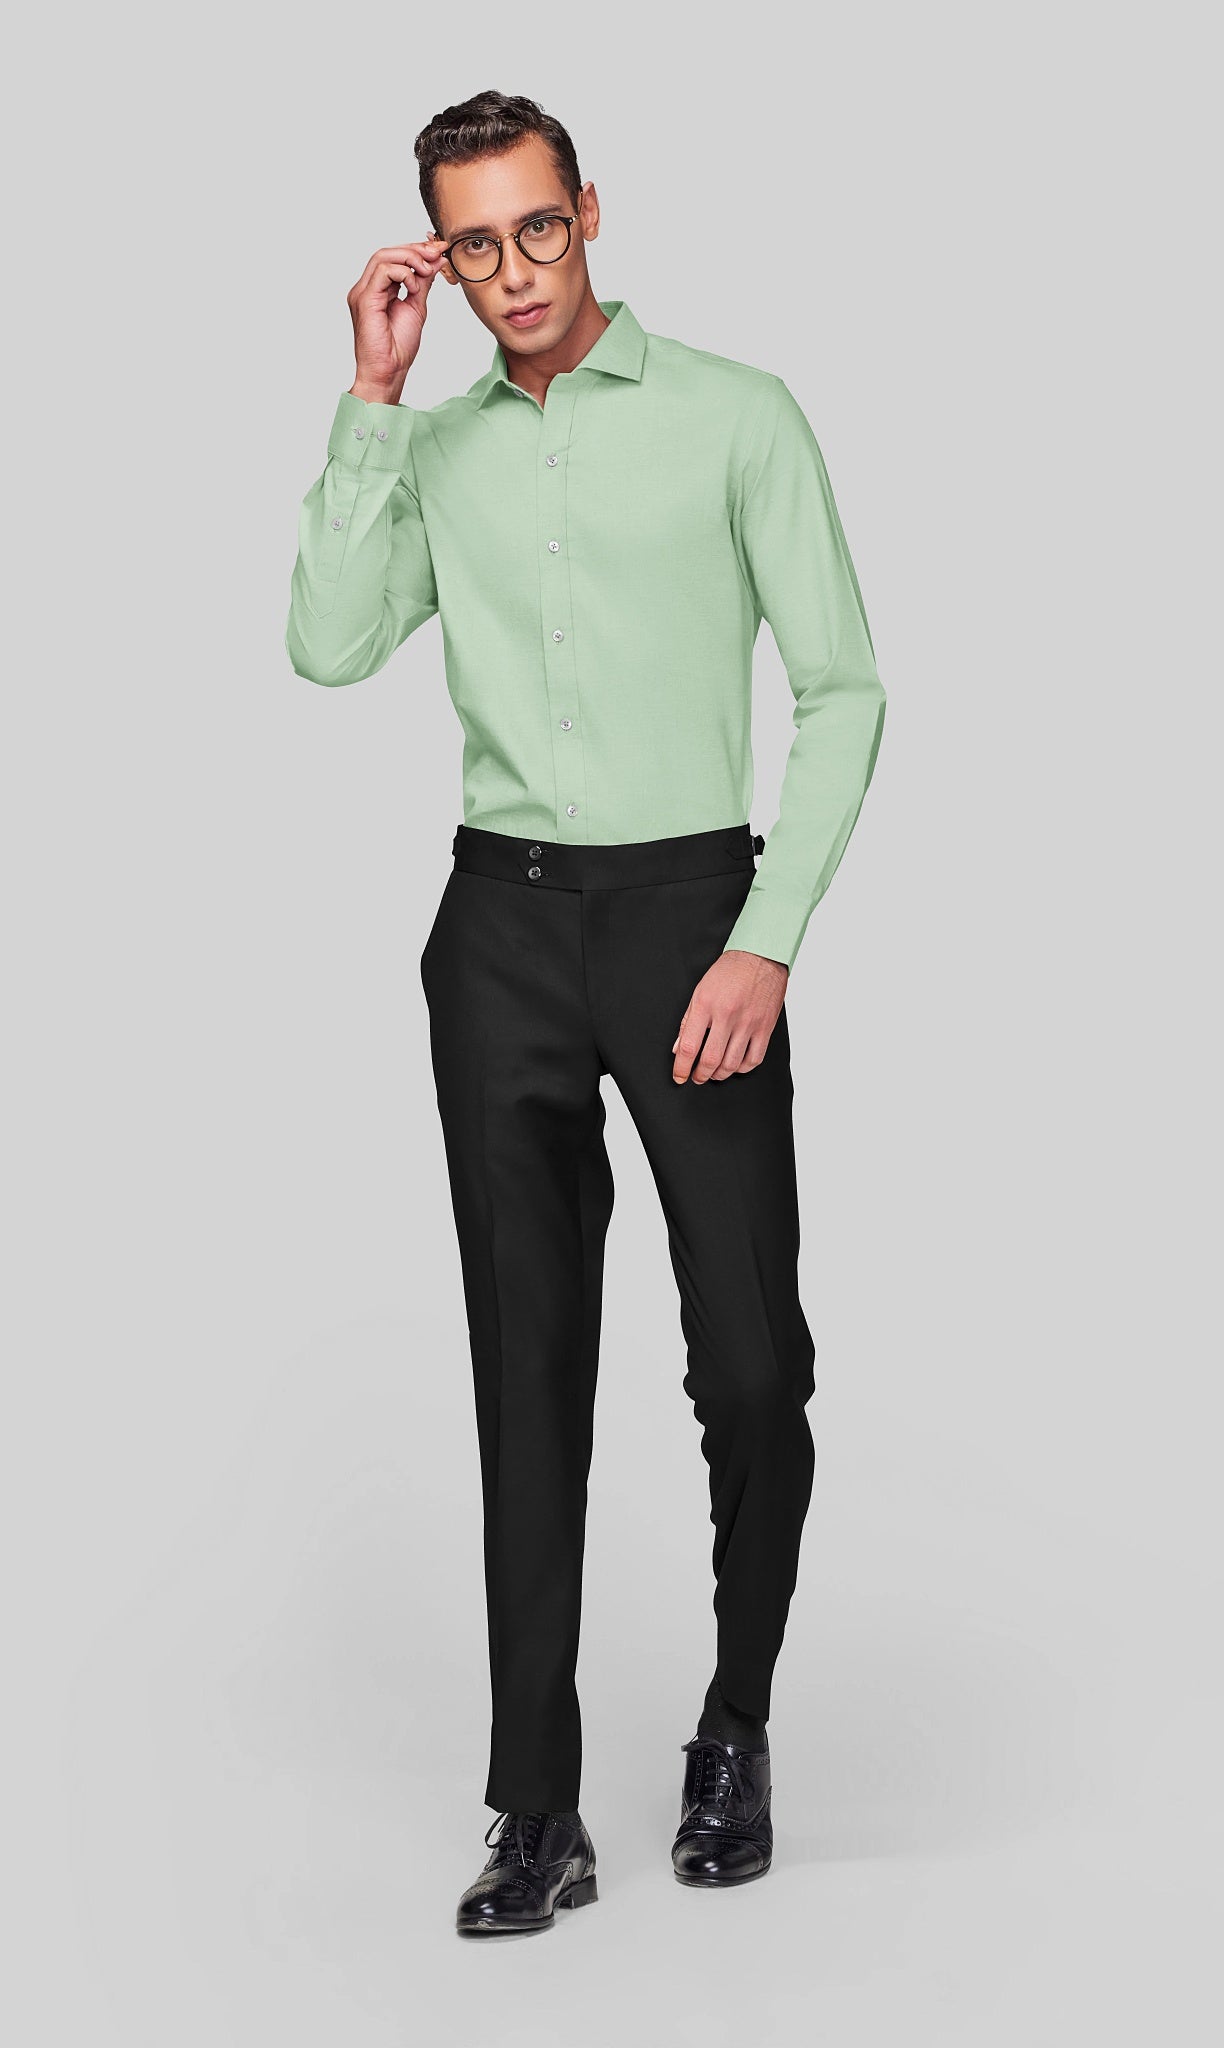 What color pants and shoes look better with a green shirt? - Quora